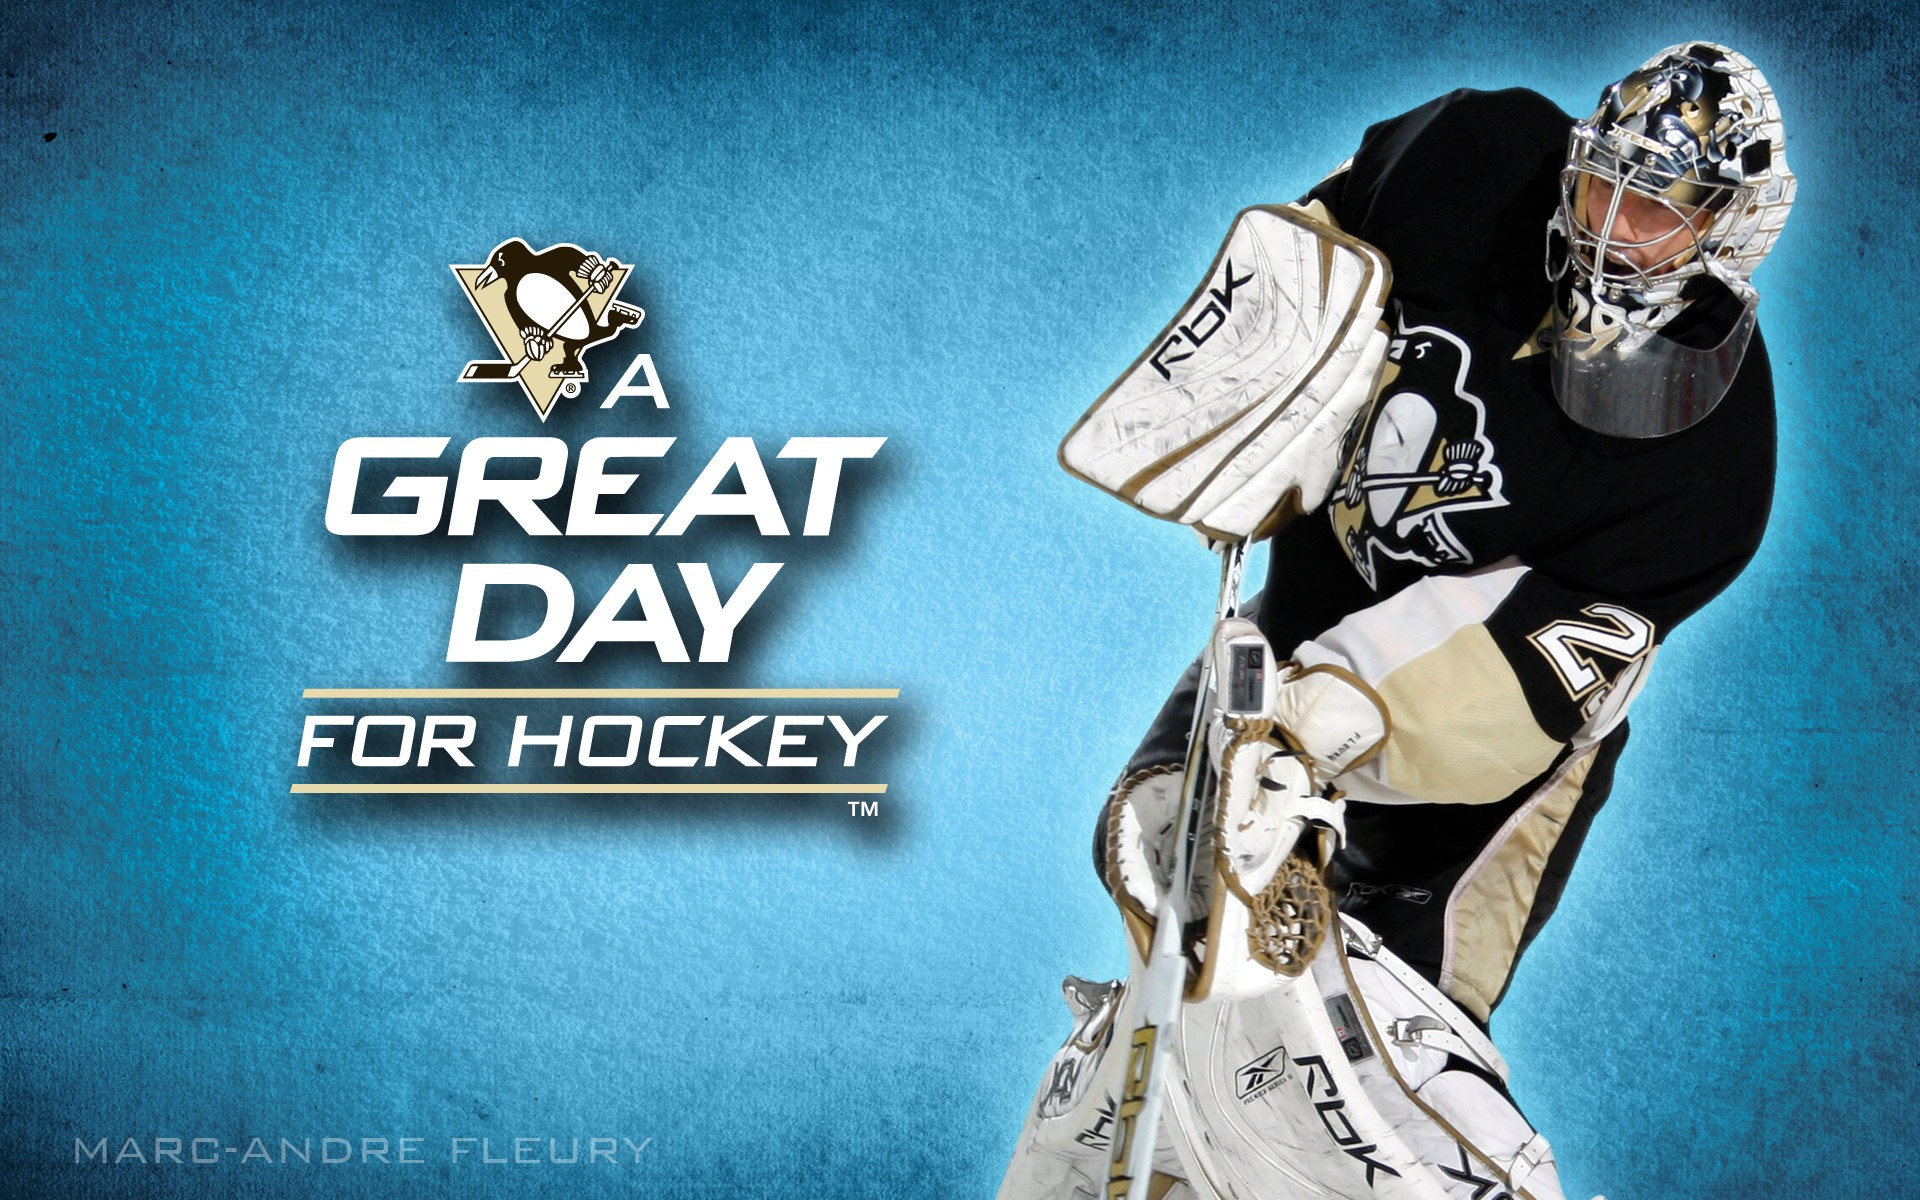 It's A Great Day For Hockey - HD Wallpaper 